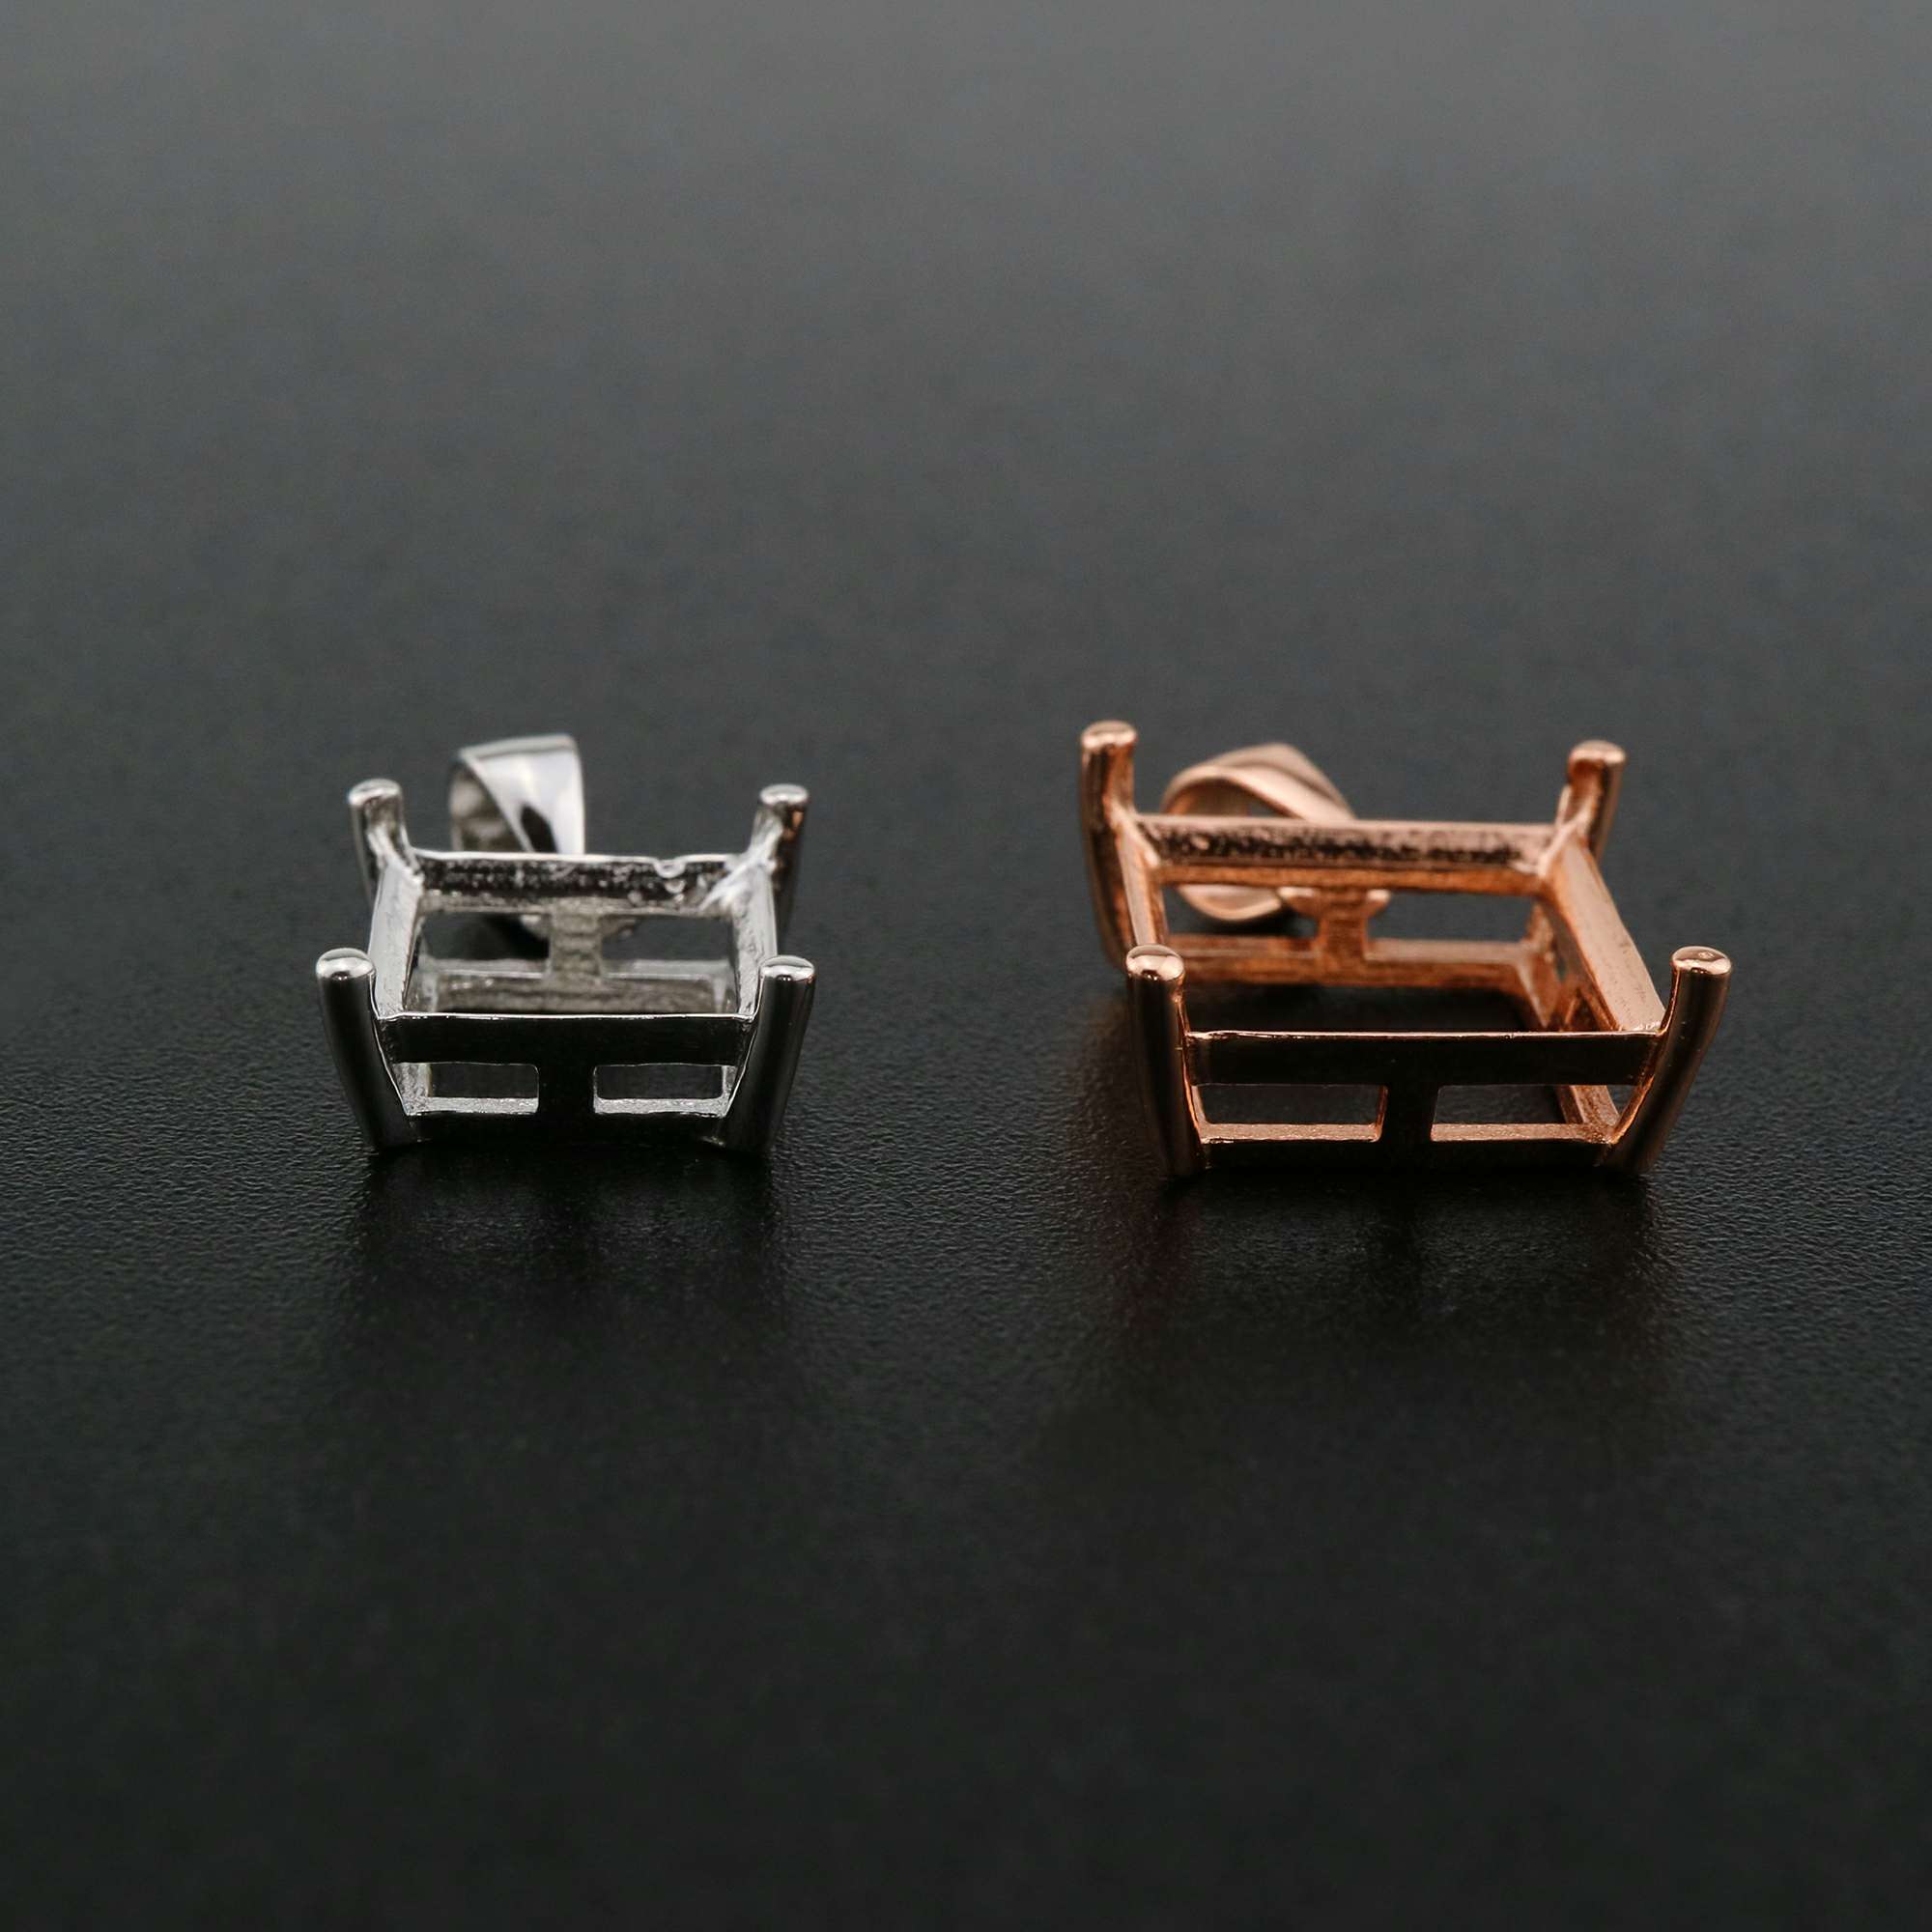 1Pcs 5-10MM Square Prong Pendant Charm Settings Simple Rose Gold Plated Solid 925 Sterling Silver DIY Bezel Tray for Gemstone 1431067 - Click Image to Close